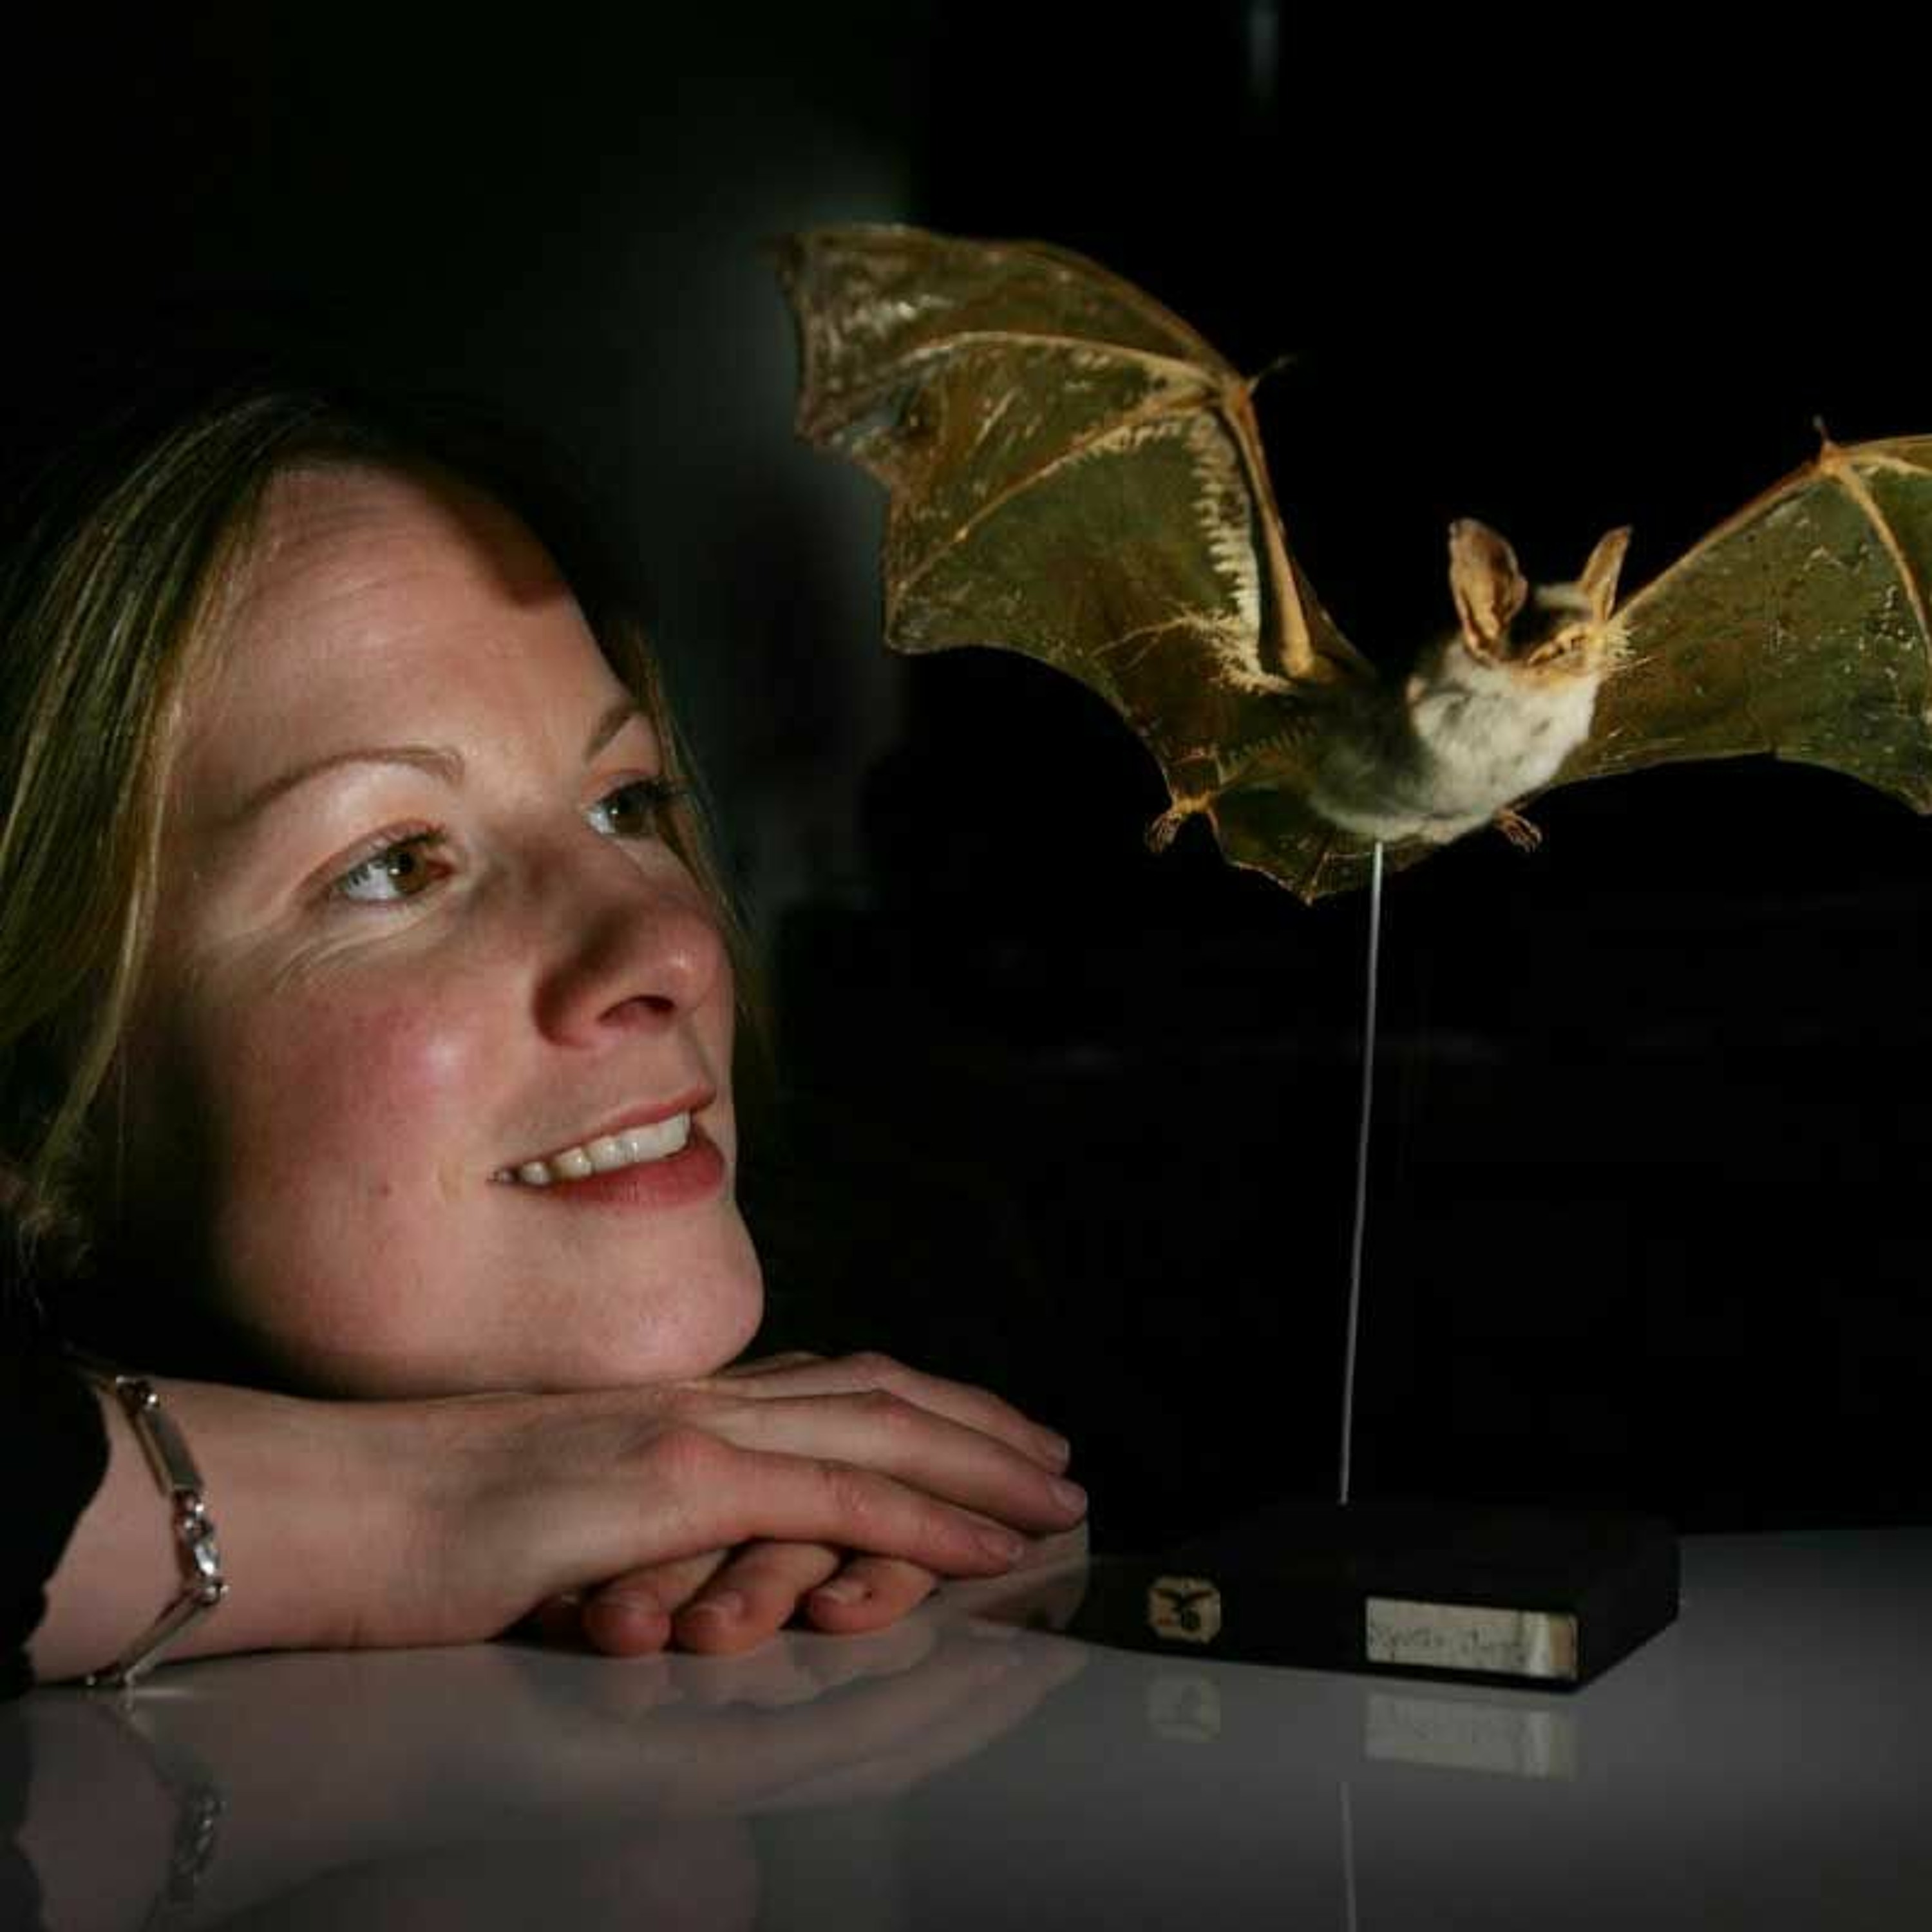 How do we study bats and rats to find the secret of everlasting youth?